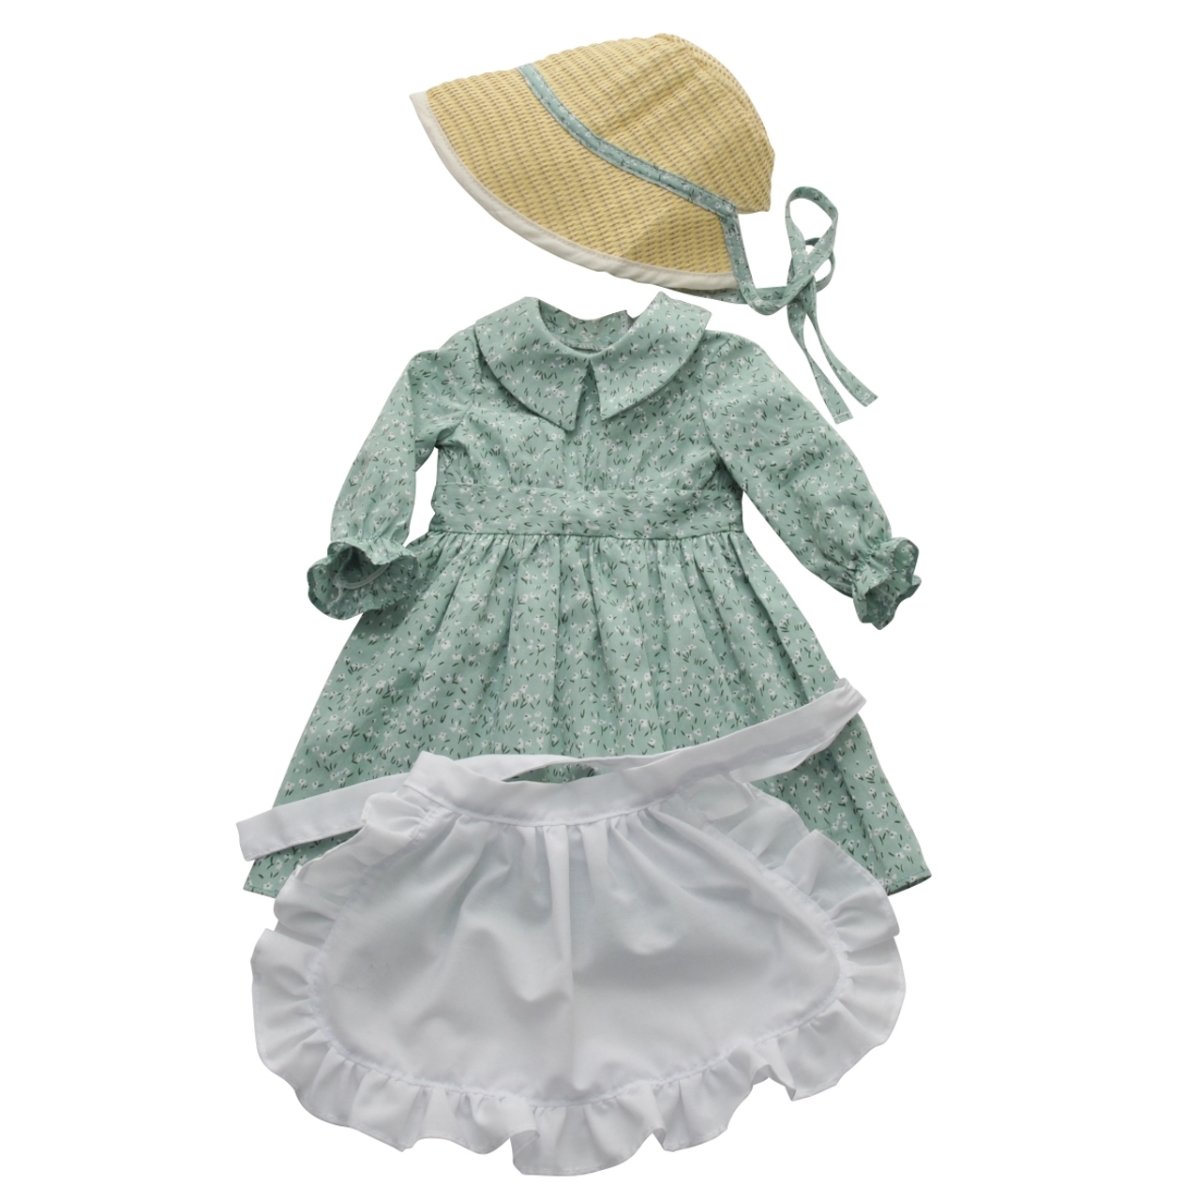 Queen's Treasures Green Calico Prairie Dress, Apron, and Bonnet, Clothes for 18 Inch Dolls - Simon's Collectibles